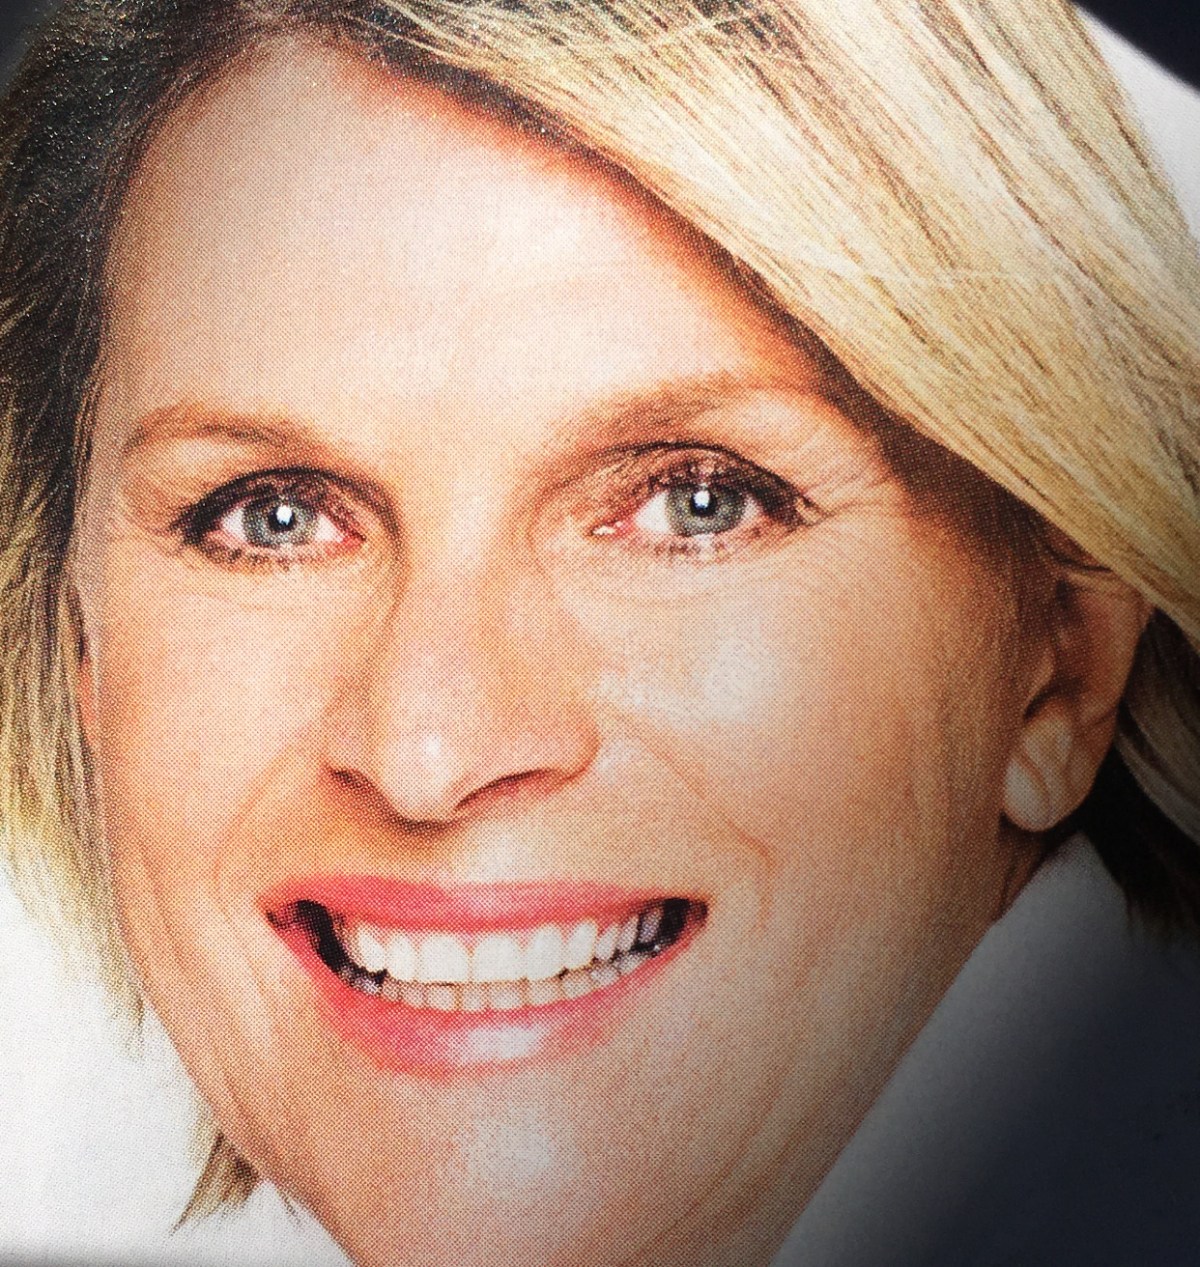 A supplied image of awarding winning sports journalist Rebecca Wilson who has died from breast cancer, aged 54, Friday, Oct. 7, 2016, Sydney. She passed away at the family home in the early hours of Friday after a long battle with the disease, her husband John Hartigan and sons Tom and Will said in a joint statement. (AAP Image/Supplied) NO ARCHIVING, EDITORIAL USE ONLY